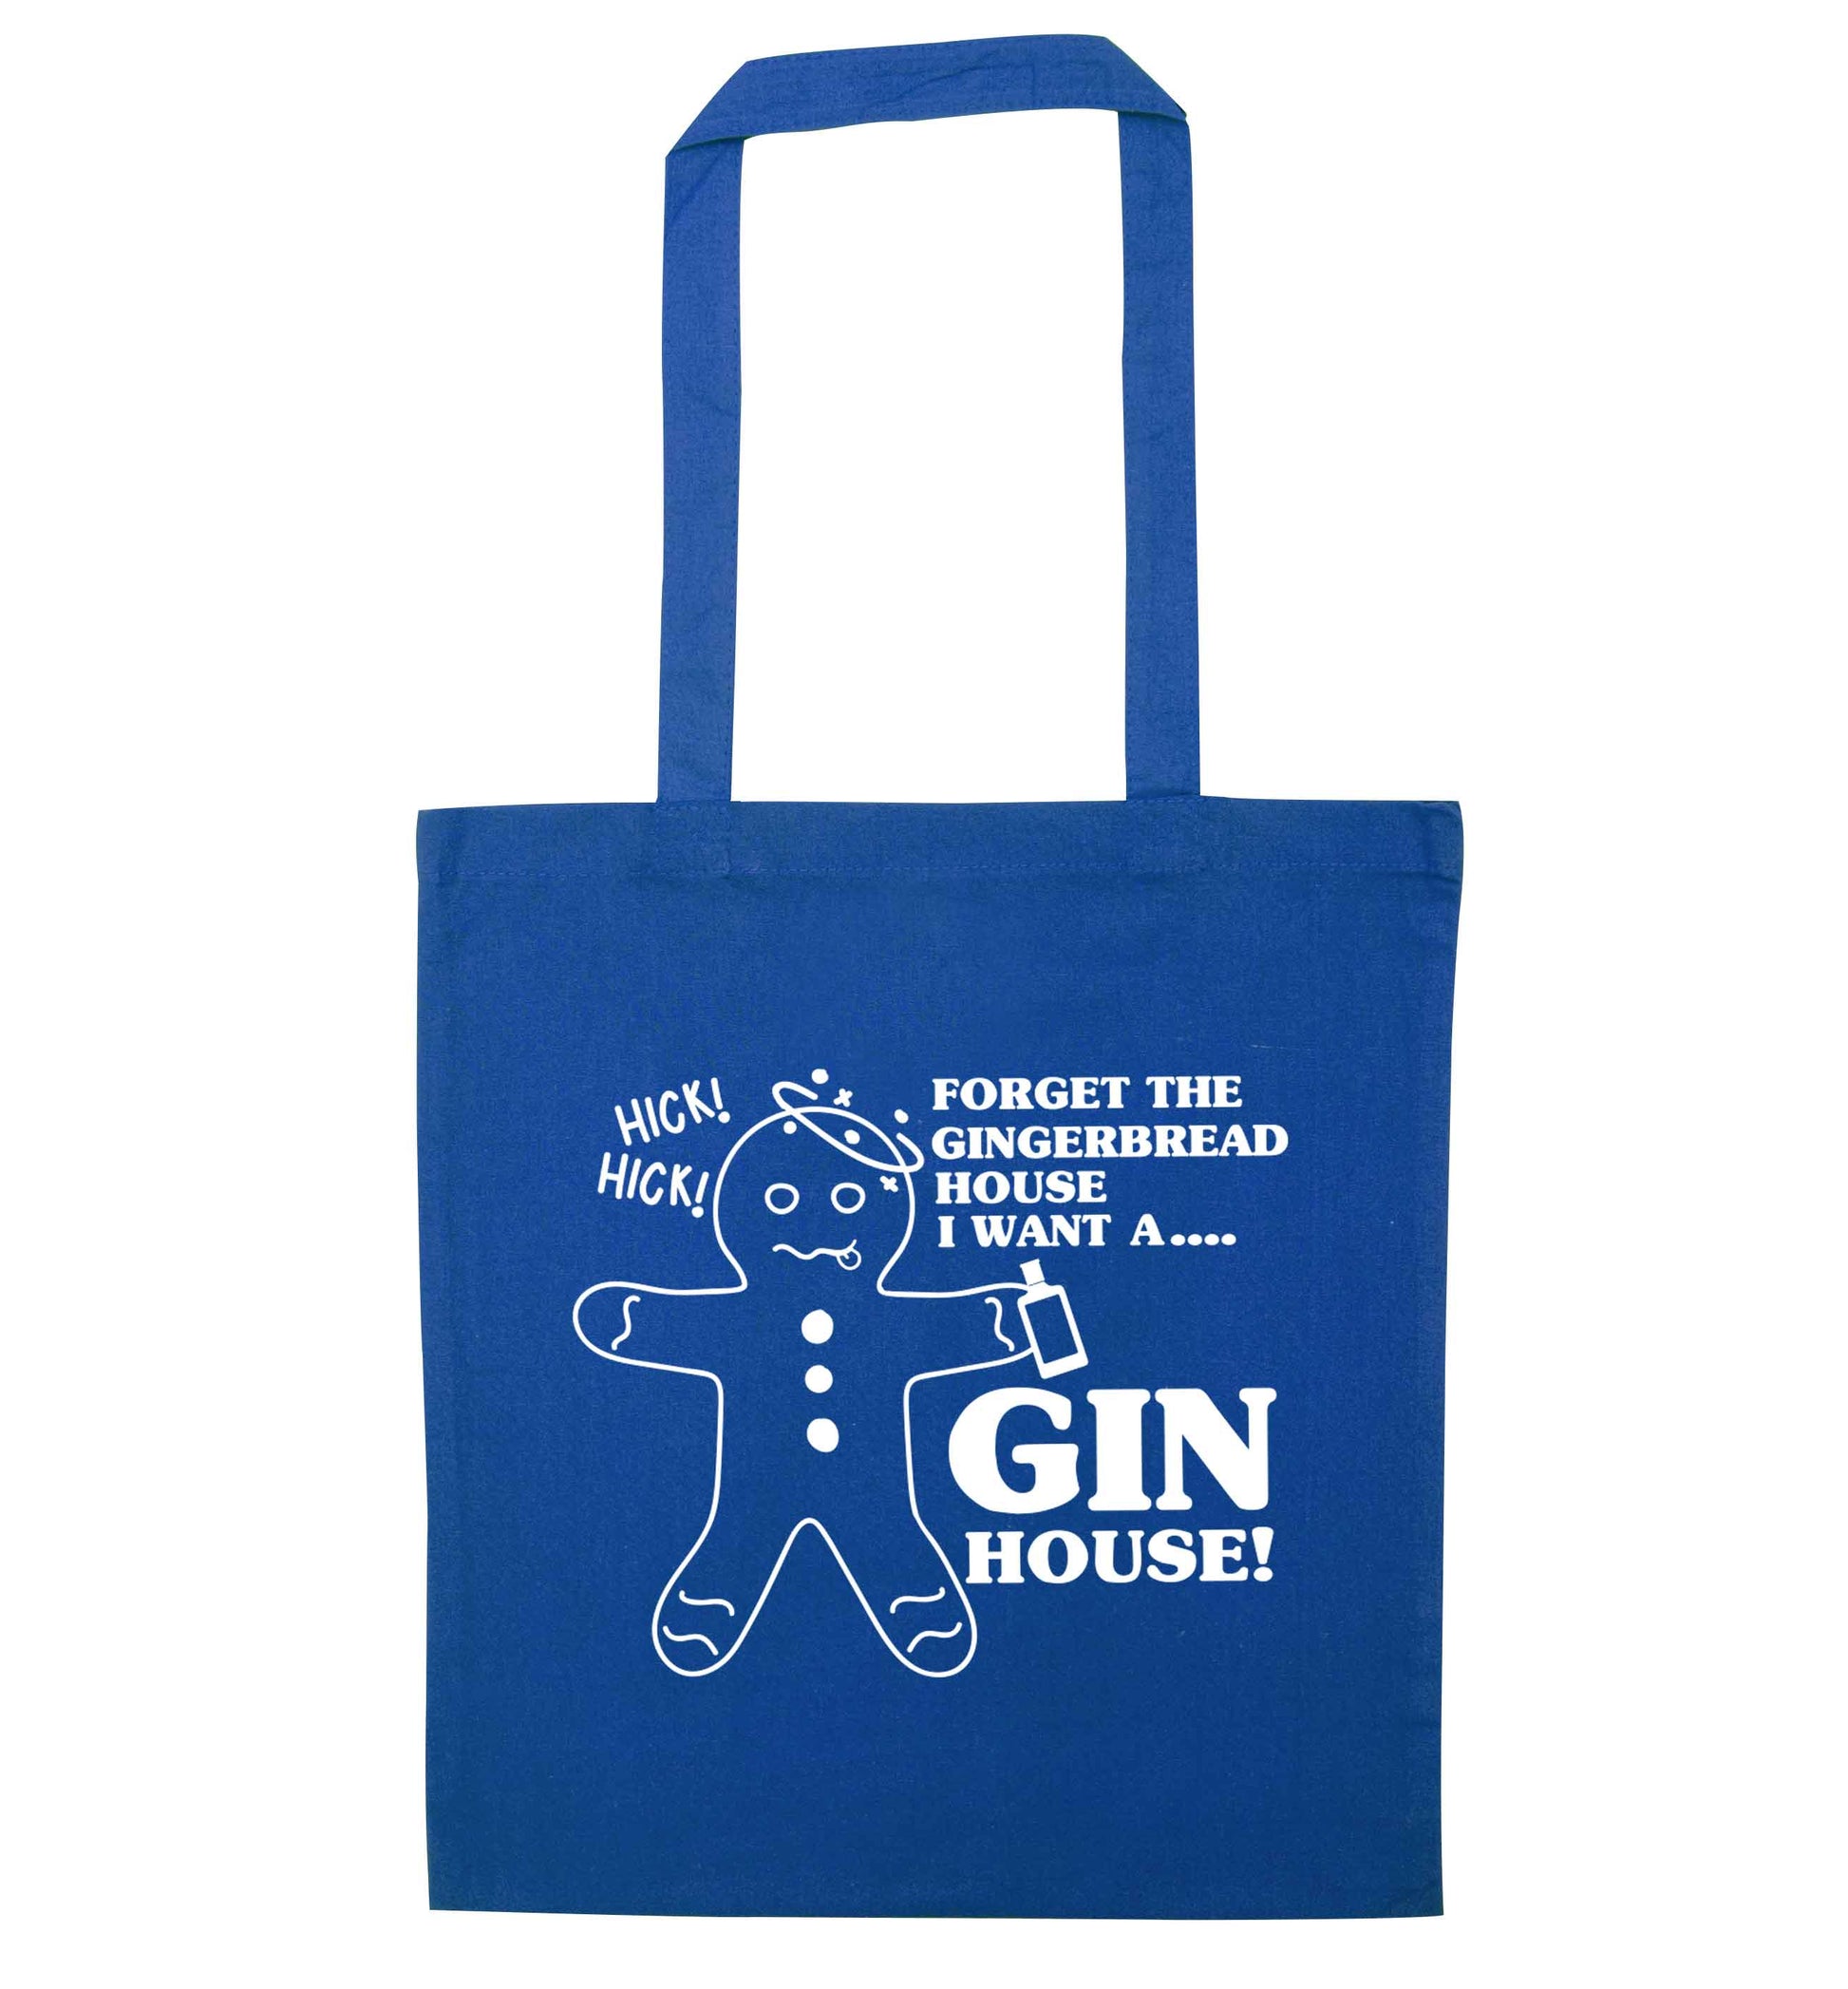 Forget the gingerbread house I want a gin house blue tote bag